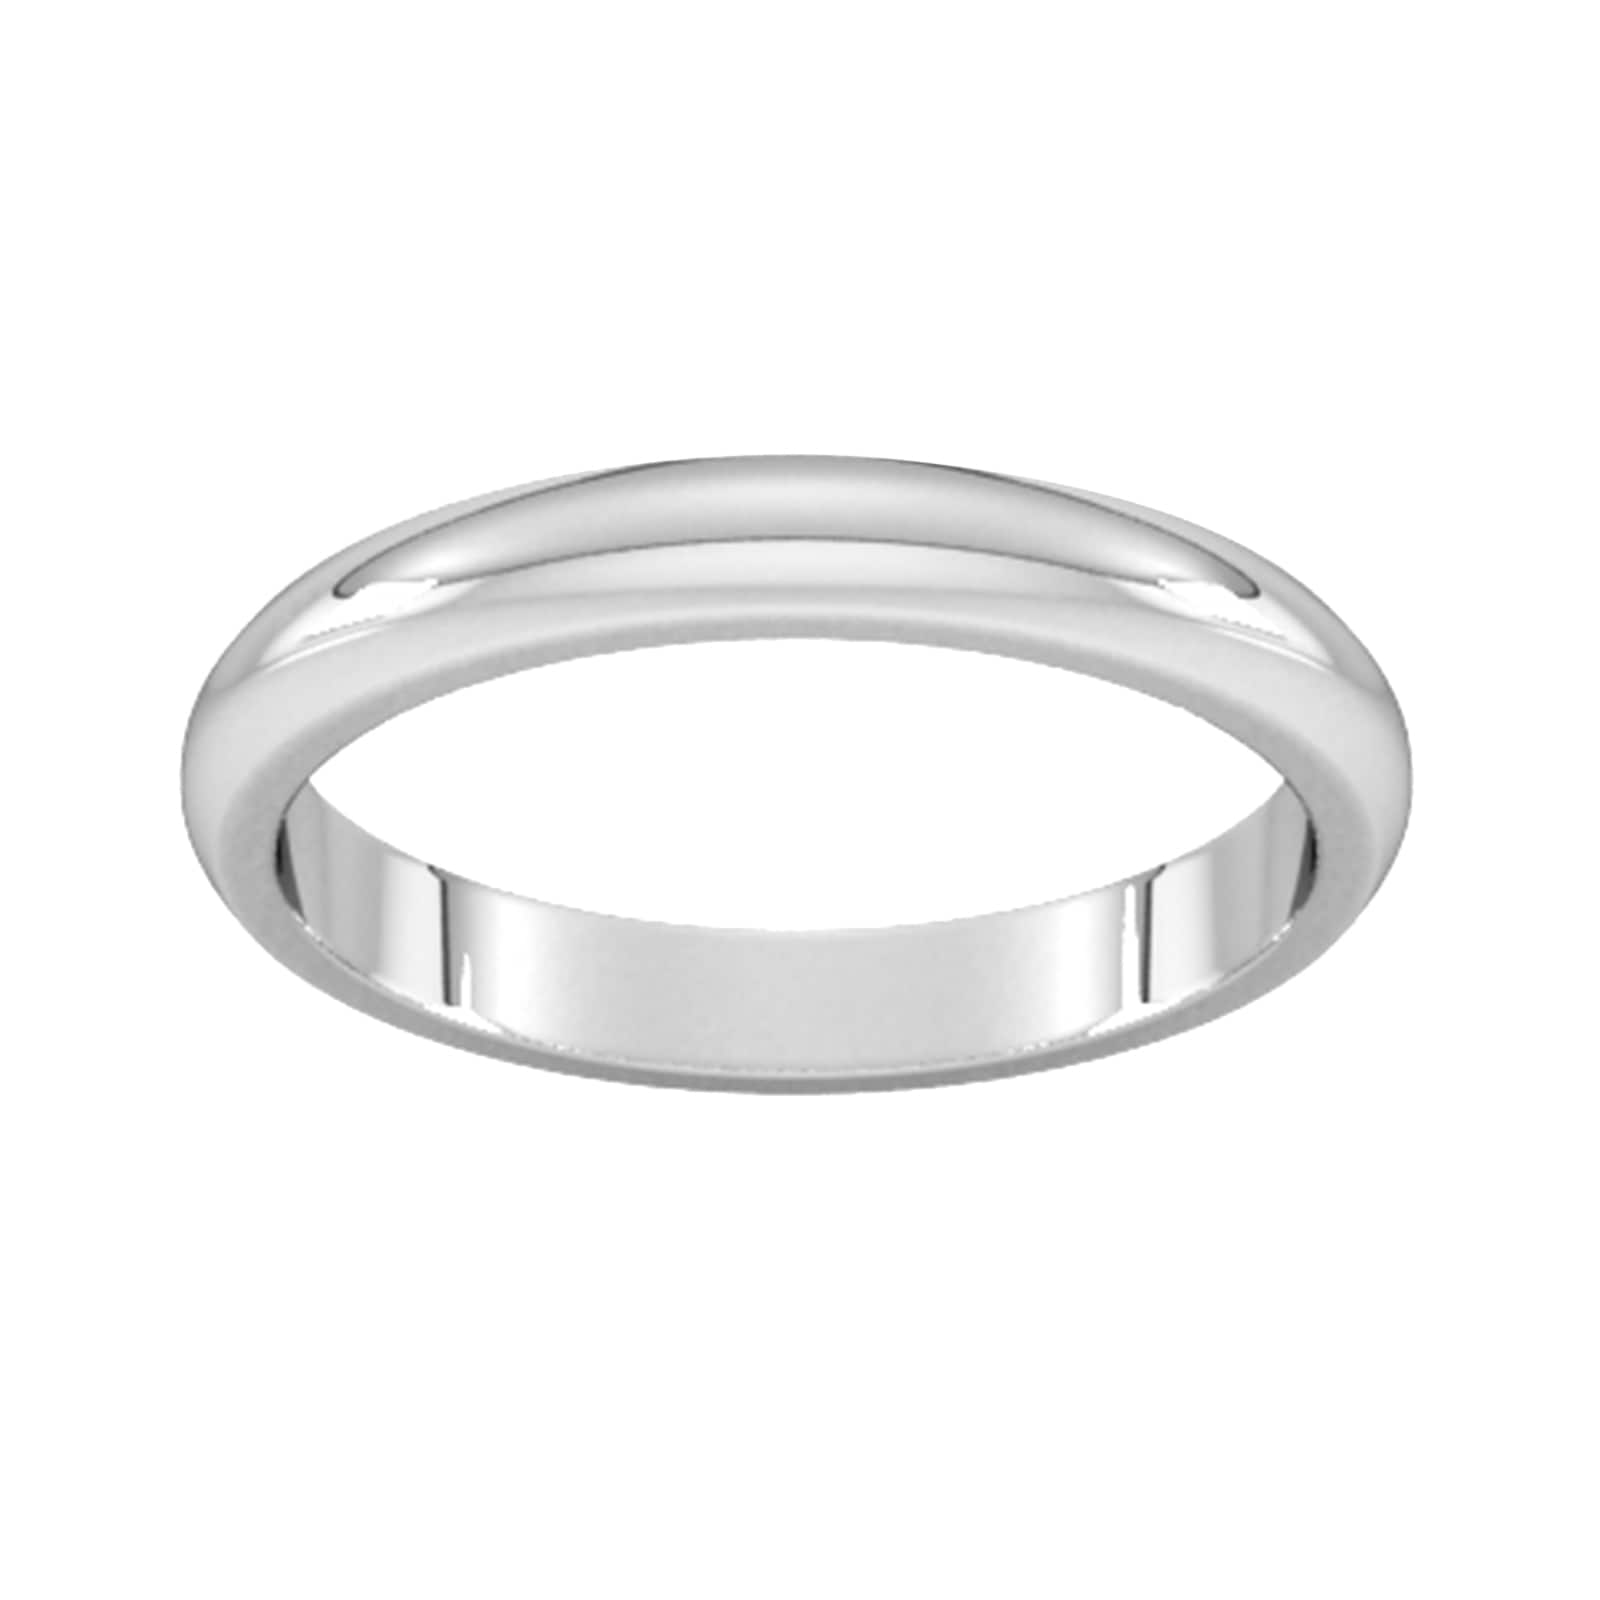 3mm D Shape Heavy Wedding Ring In 18 Carat White Gold - Ring Size W